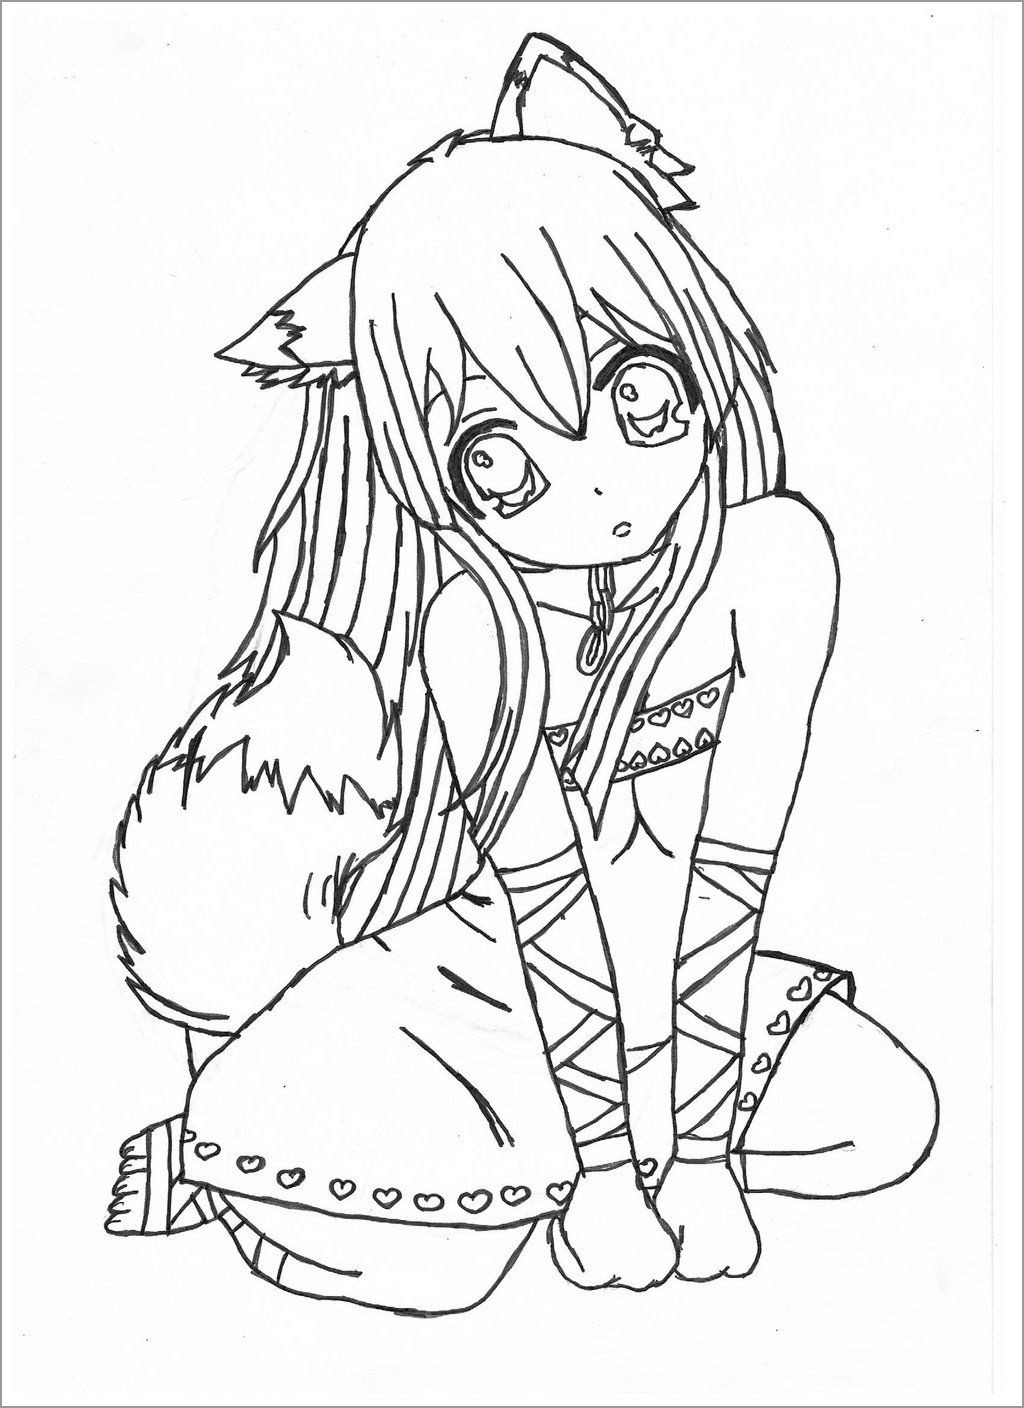 Cute Anime Girl Coloring Page   ColoringBay